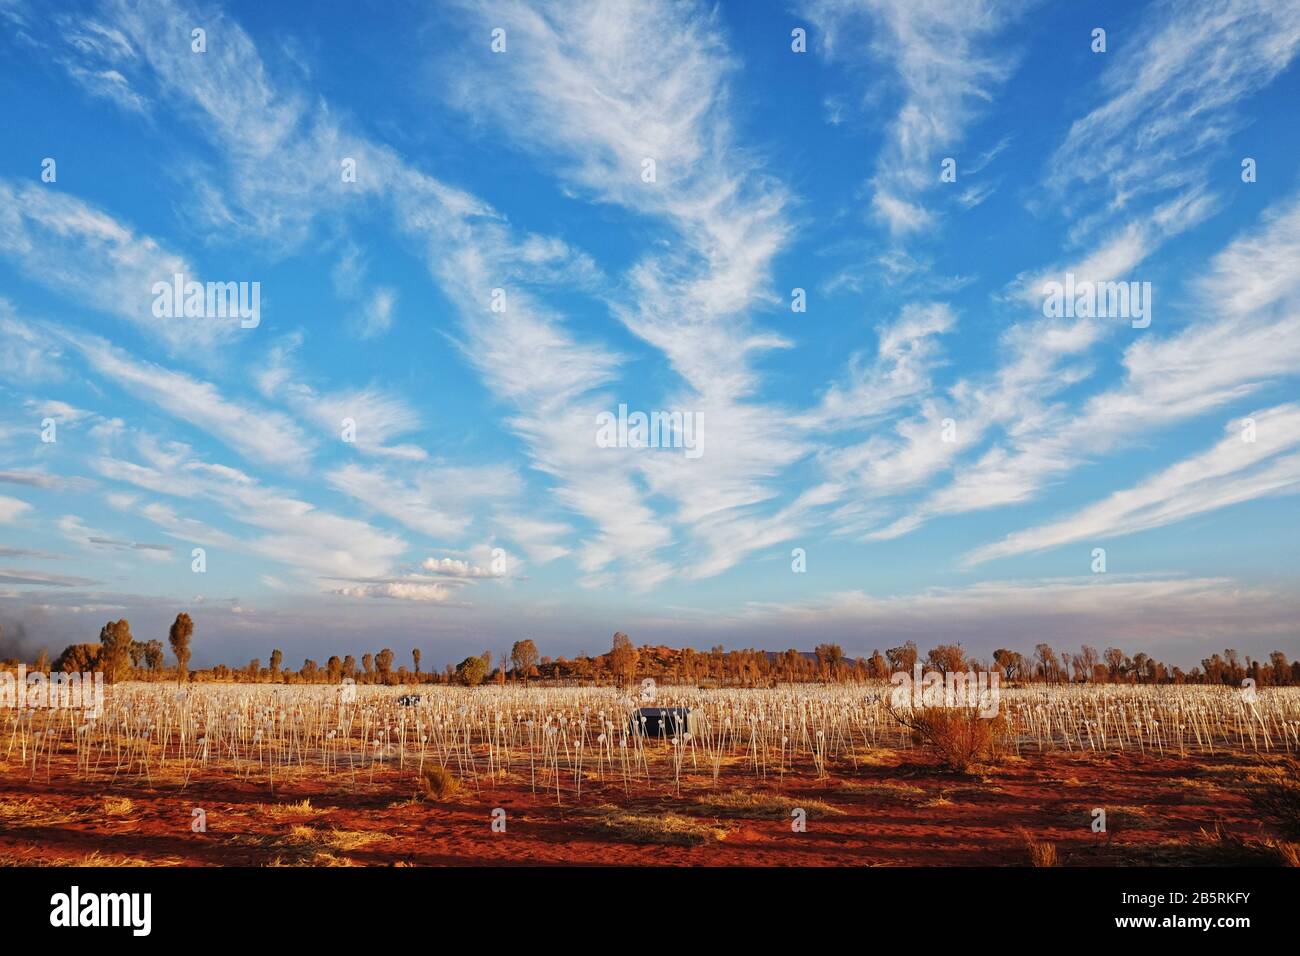 Feather like cirrus clouds overhead, the Field Of Light with low hills and Desert Oaks as the sun casts long shadows across red soil, N.T.  Australia Stock Photo